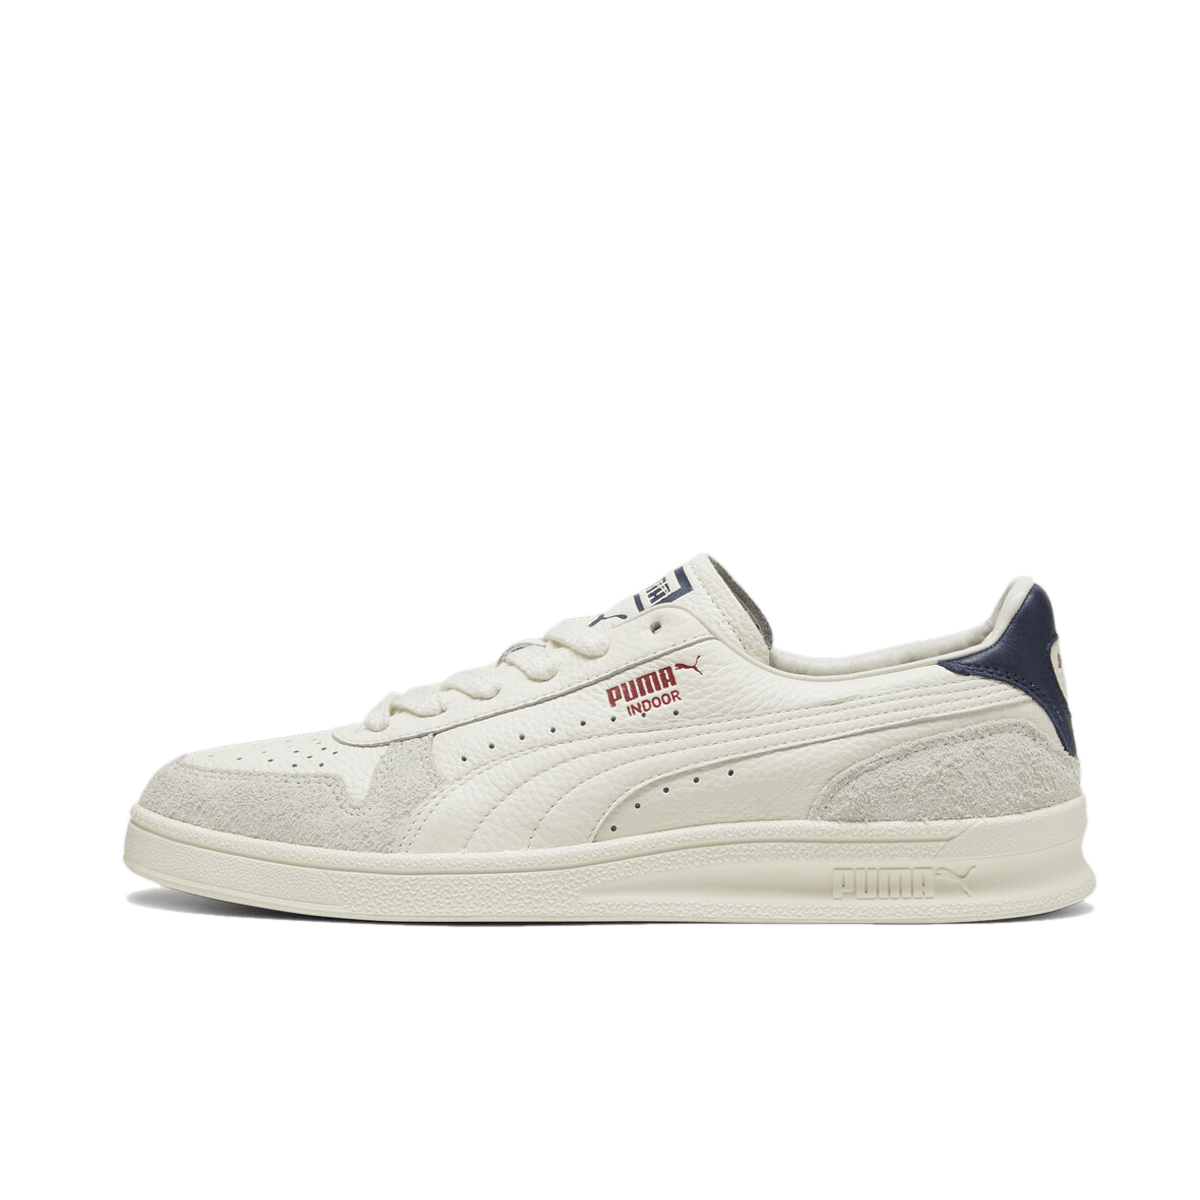 Puma Indoor 'Frosted Ivory' 397254-01